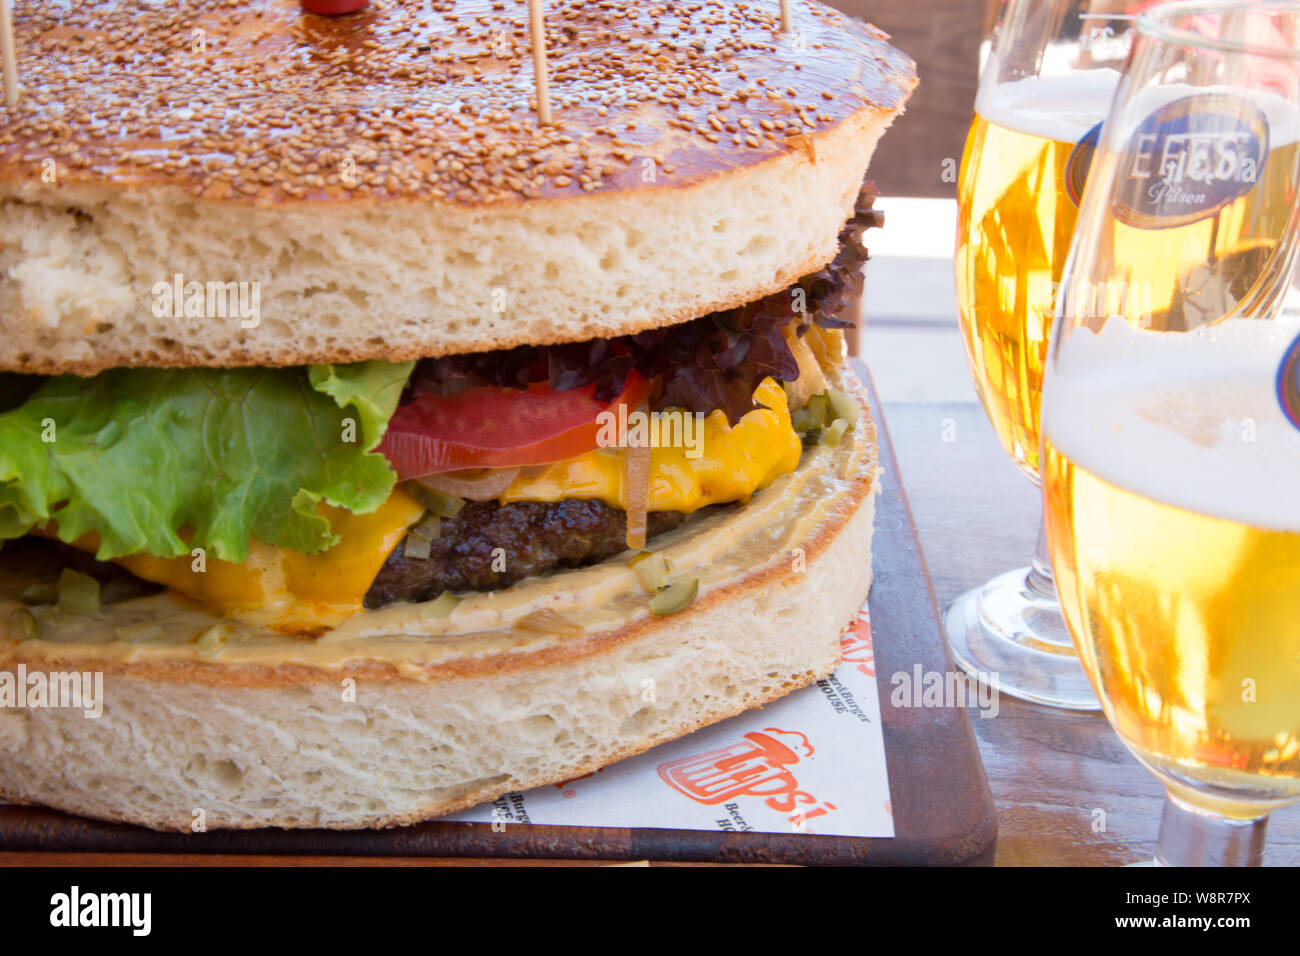 Large one kilo Beef burger in a bun served at Tipsi beer and burger house, Icmeler, Mugla province, Turkey Stock Photo